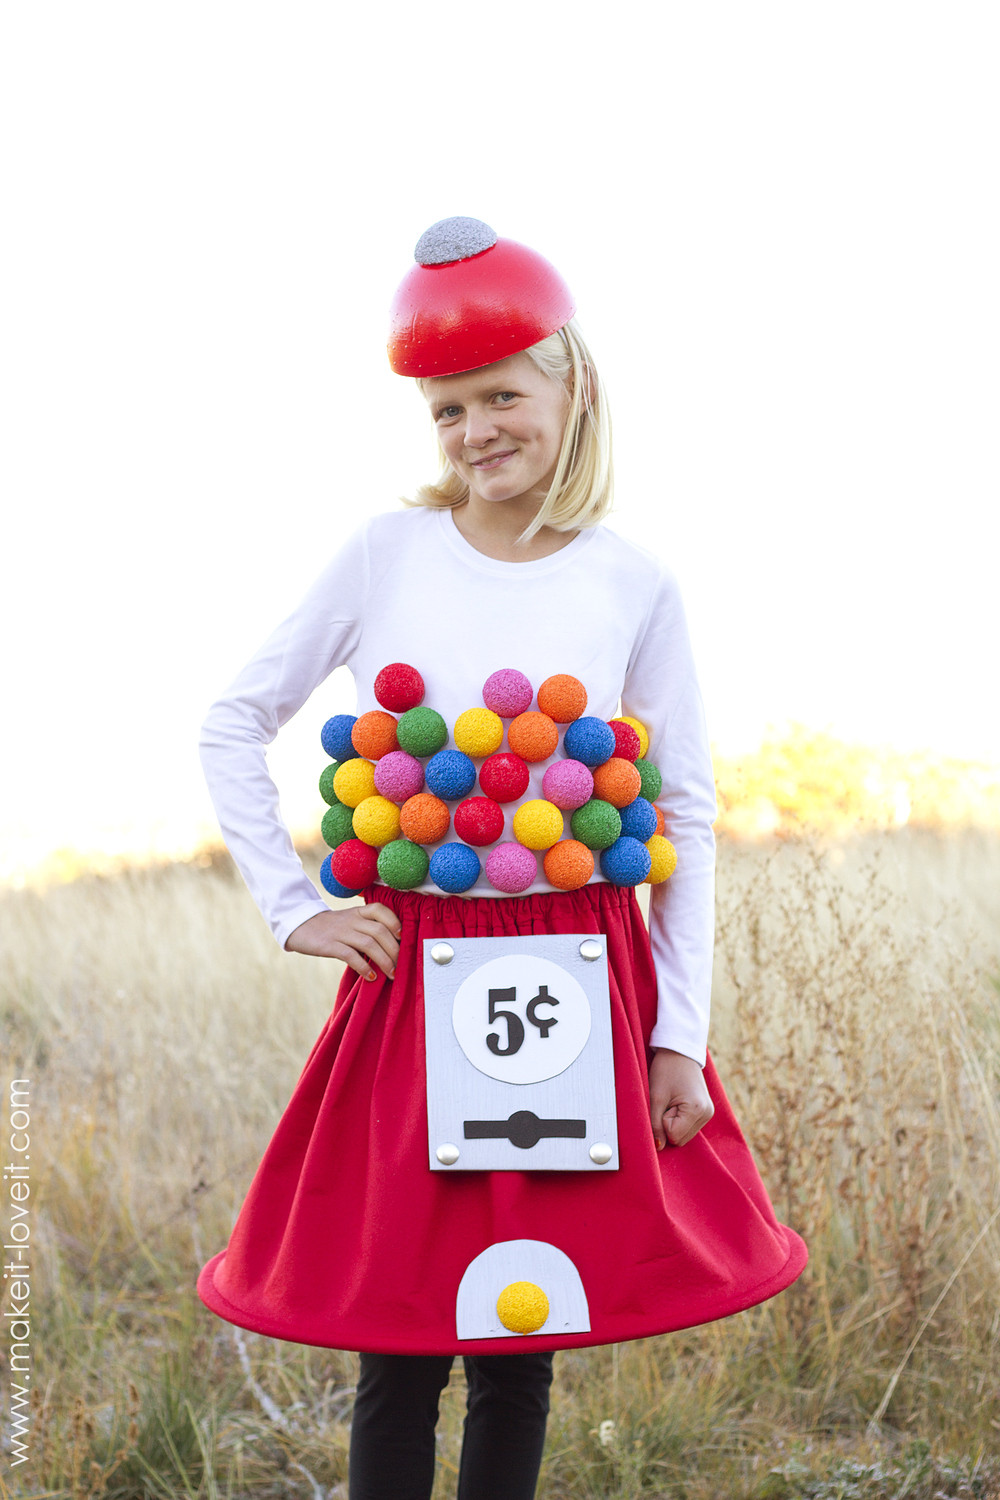 DIY Gumball Machine Costume
 36 SIMPLE COSTUME IDEAS for Kids and Adults